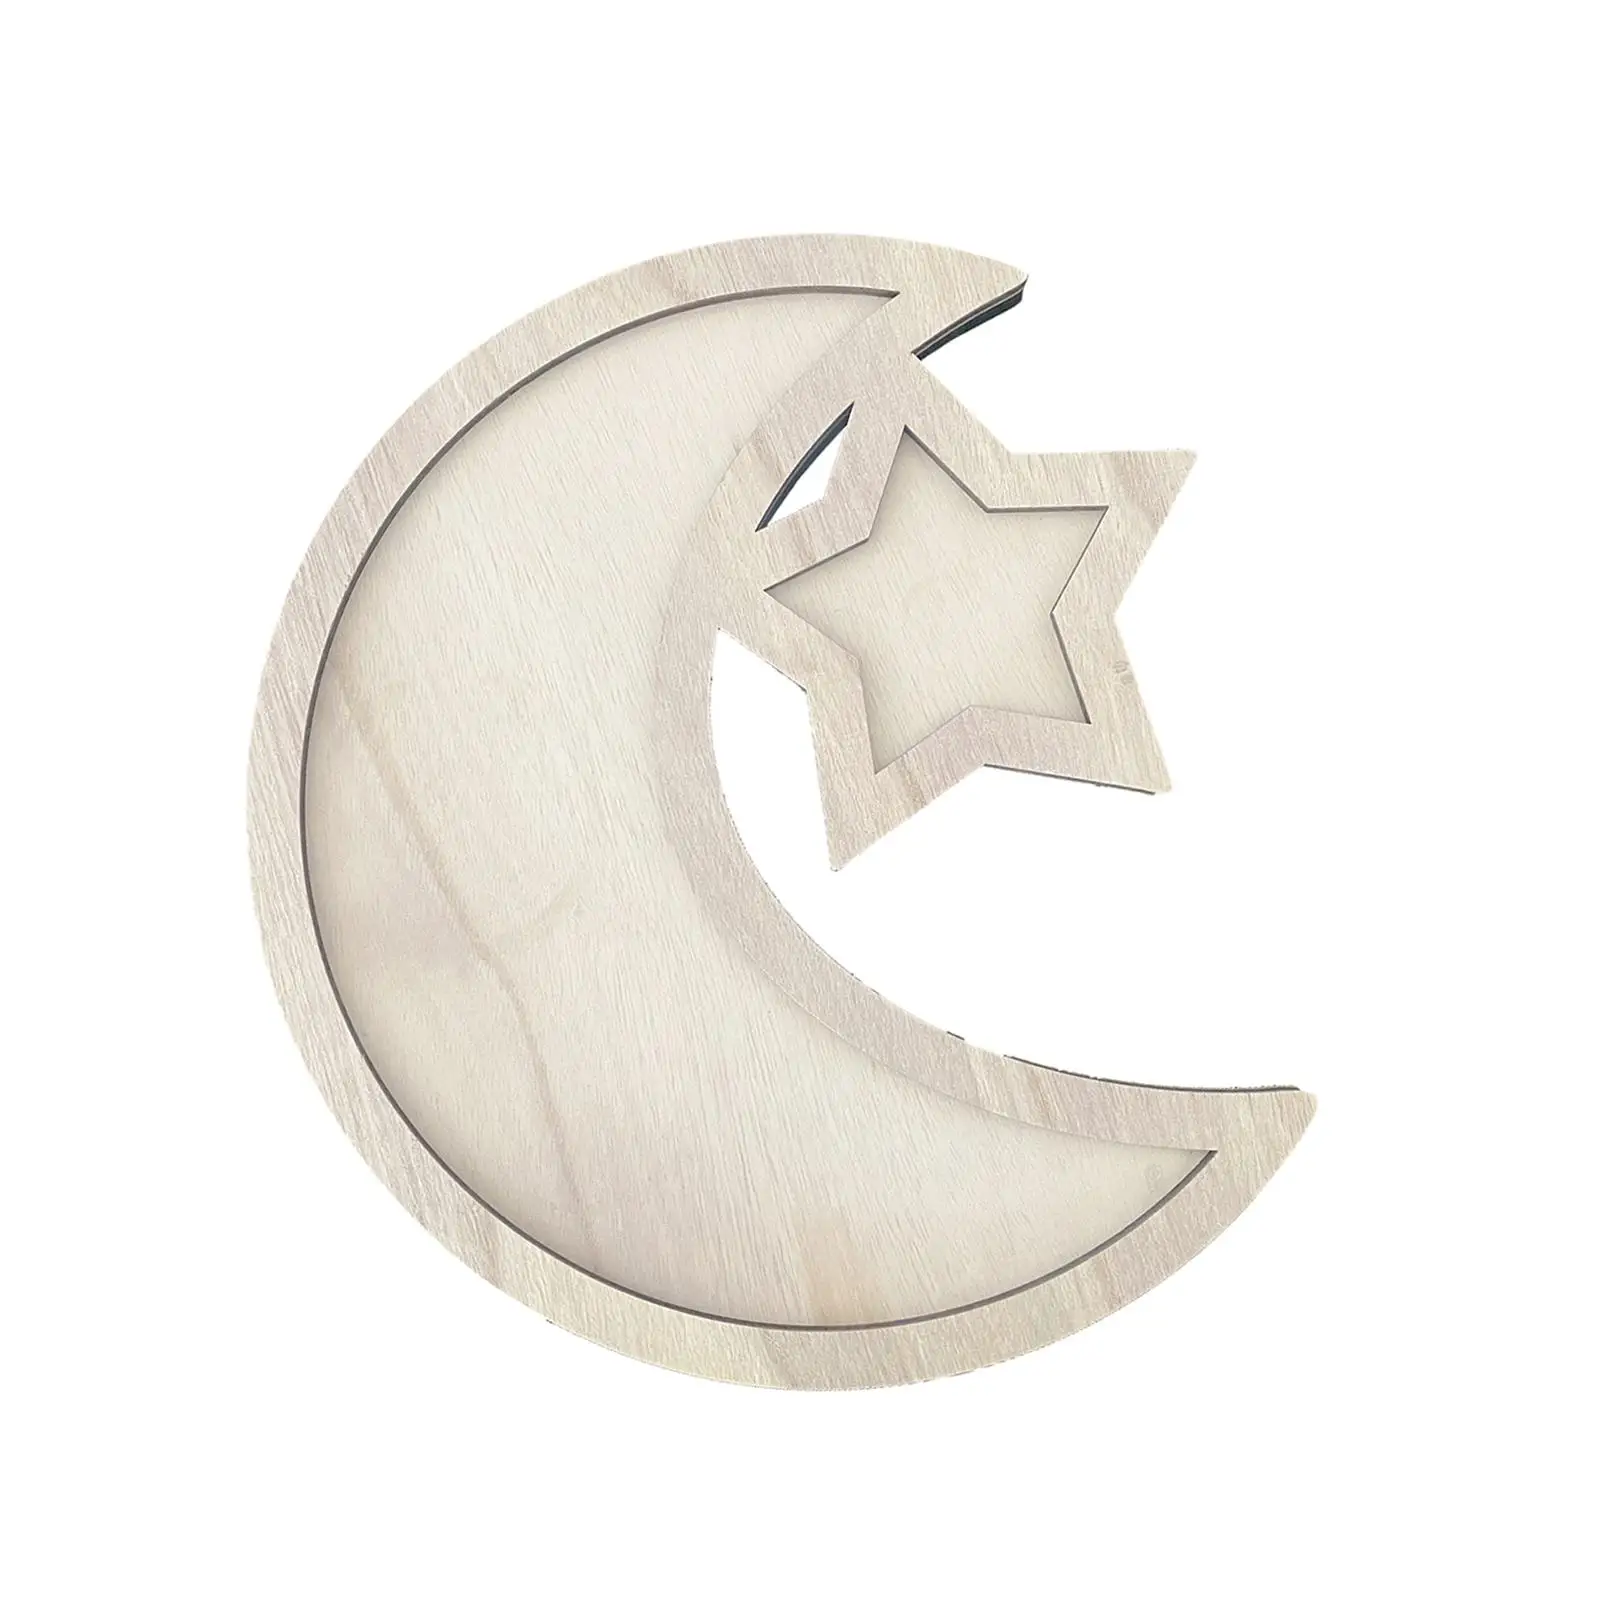 Wood Fruit Tray Moon and Star Centerpiece Table Decor Serving Tray Food Tray for Farmhouse Holiday Kitchen Counter Family Dinner